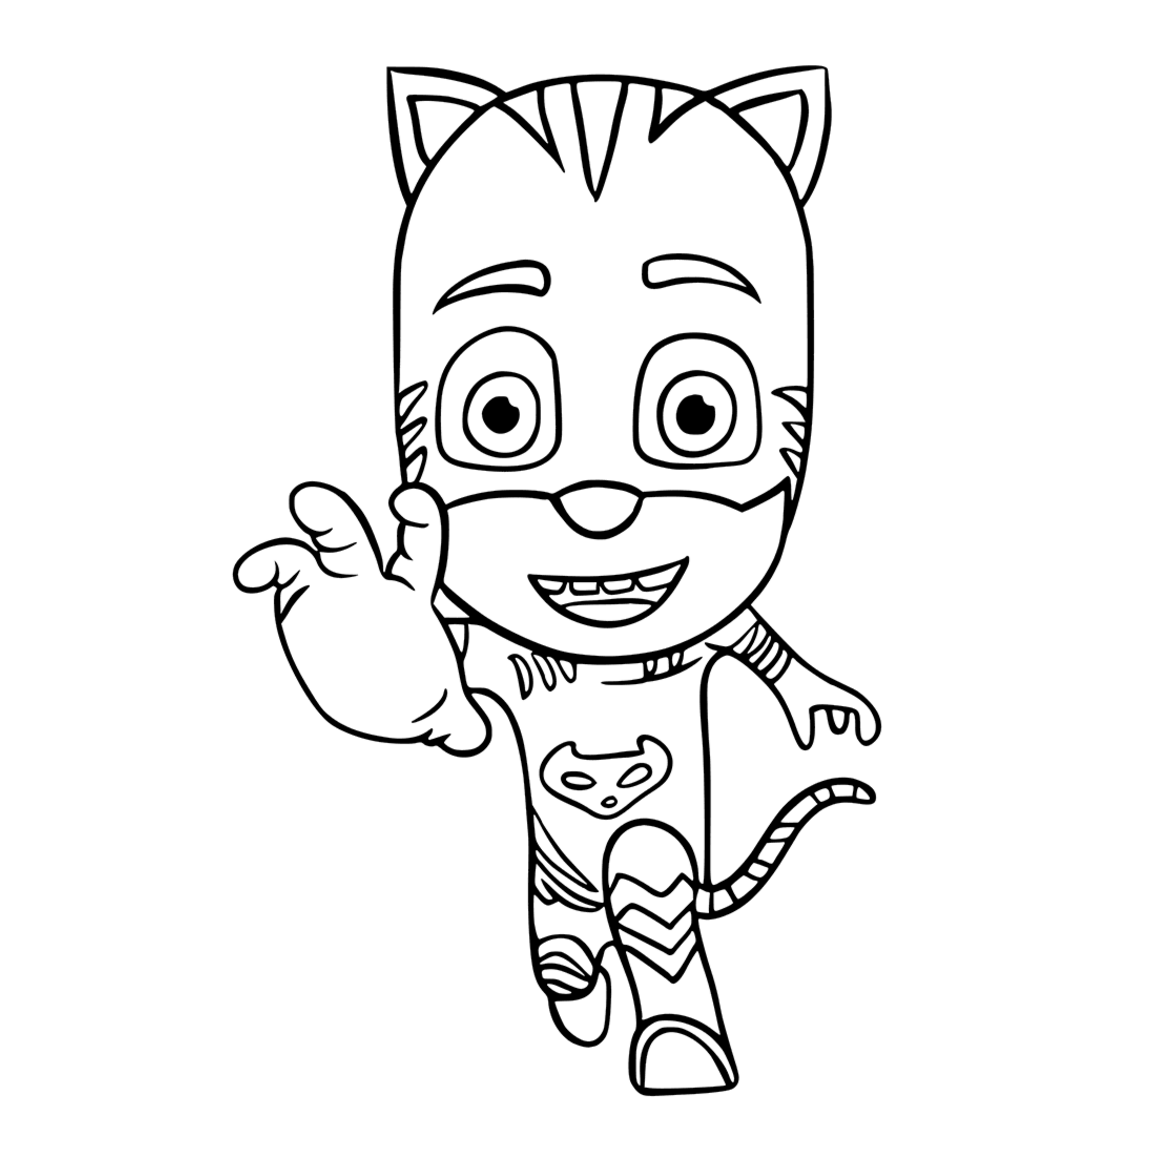 PJ Masks coloring pages to download and print for free